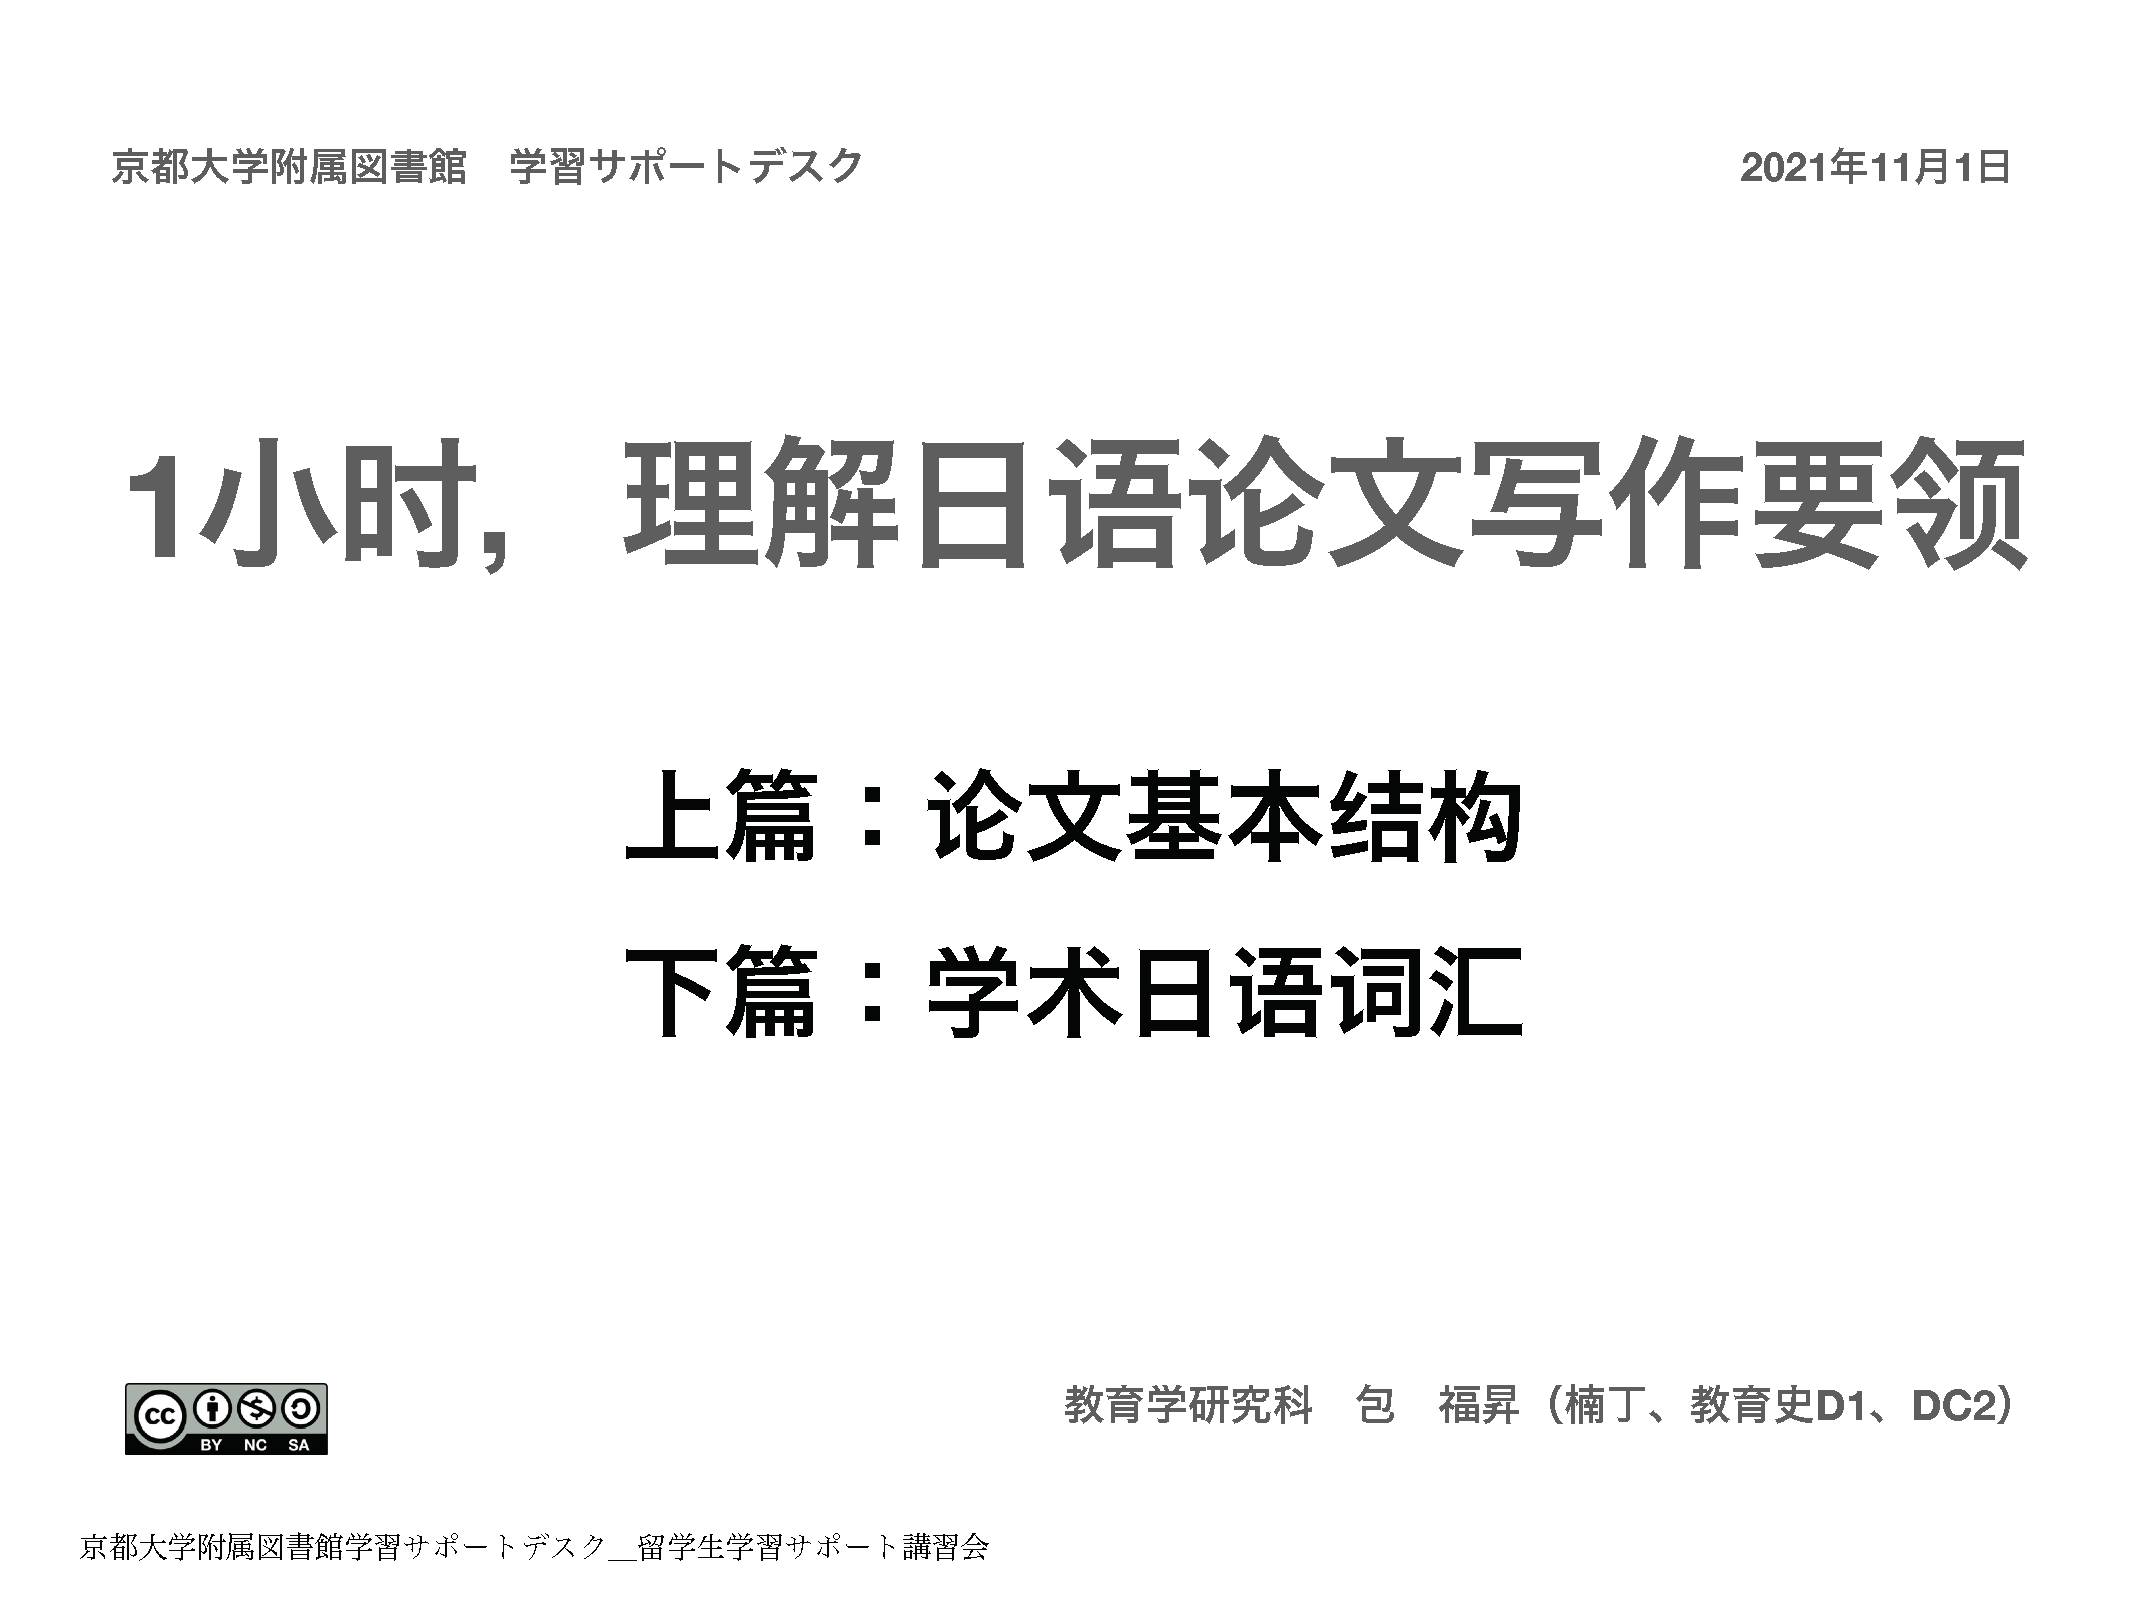 PDF　一小时，理解日语论文写作要领　下　（you can read this at library page on cyber learning space）